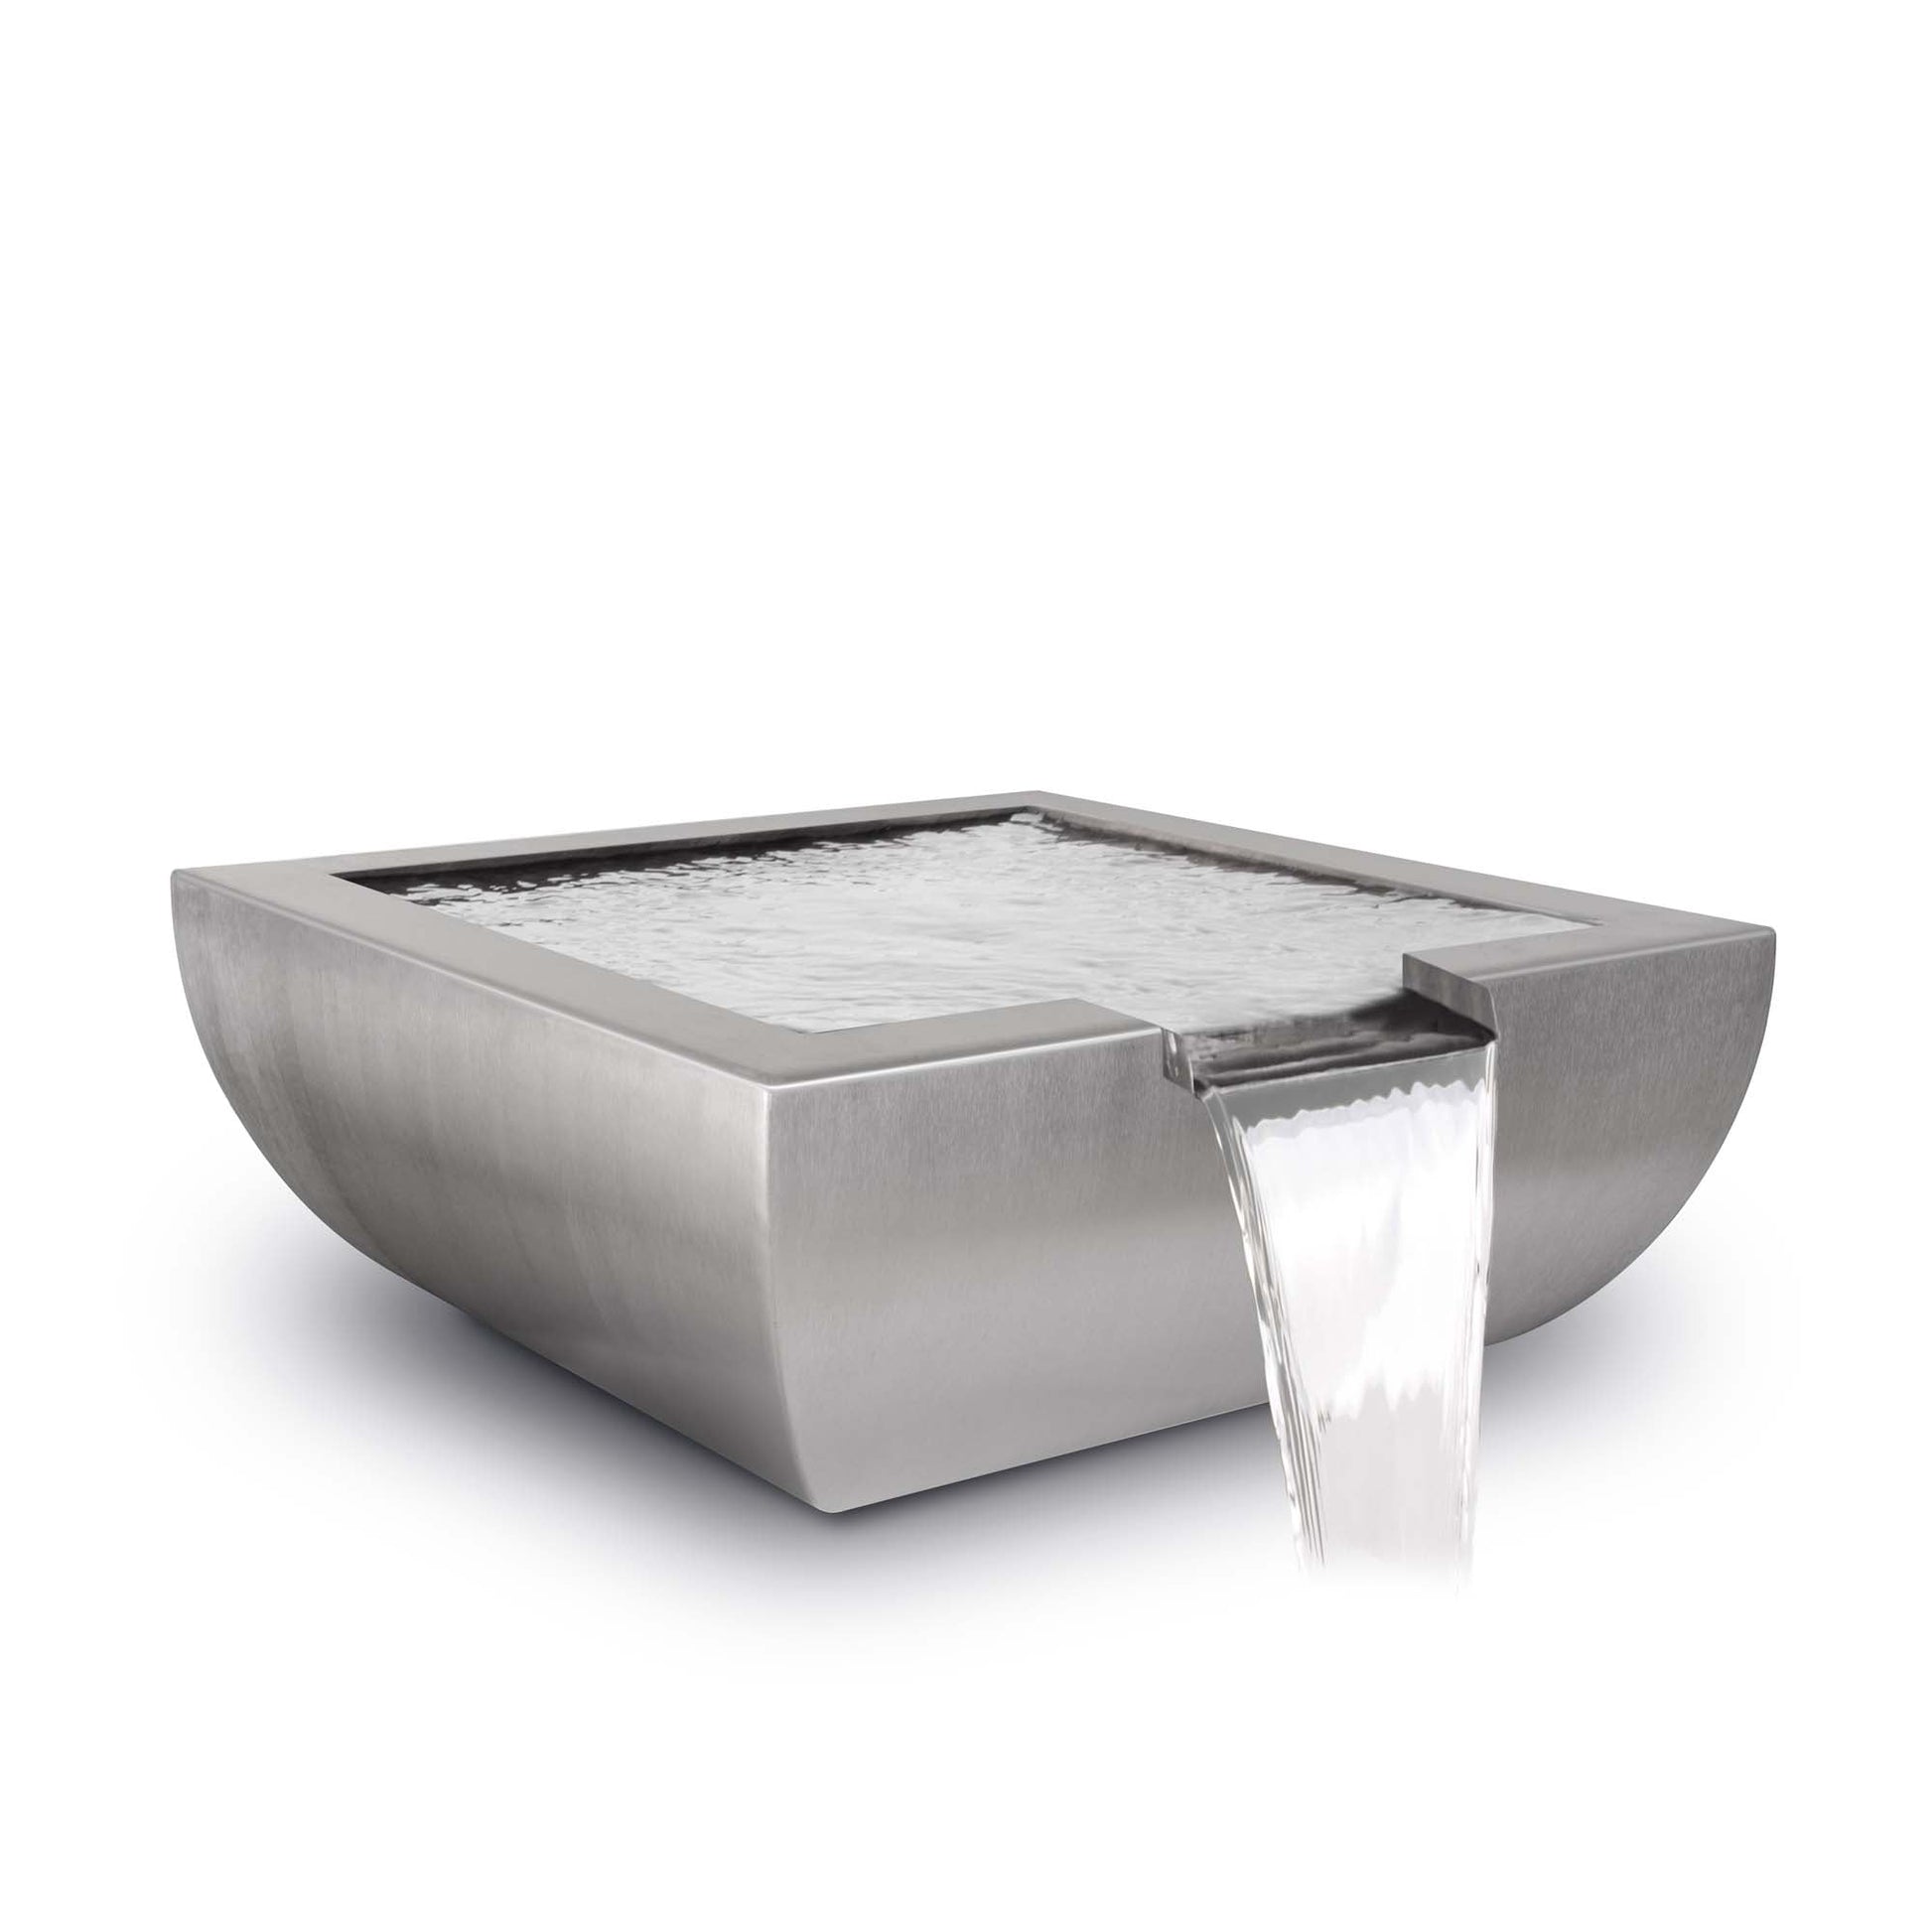 The Outdoor Plus Square Avalon 36" Silver Vein Powder Coated Water Bowl